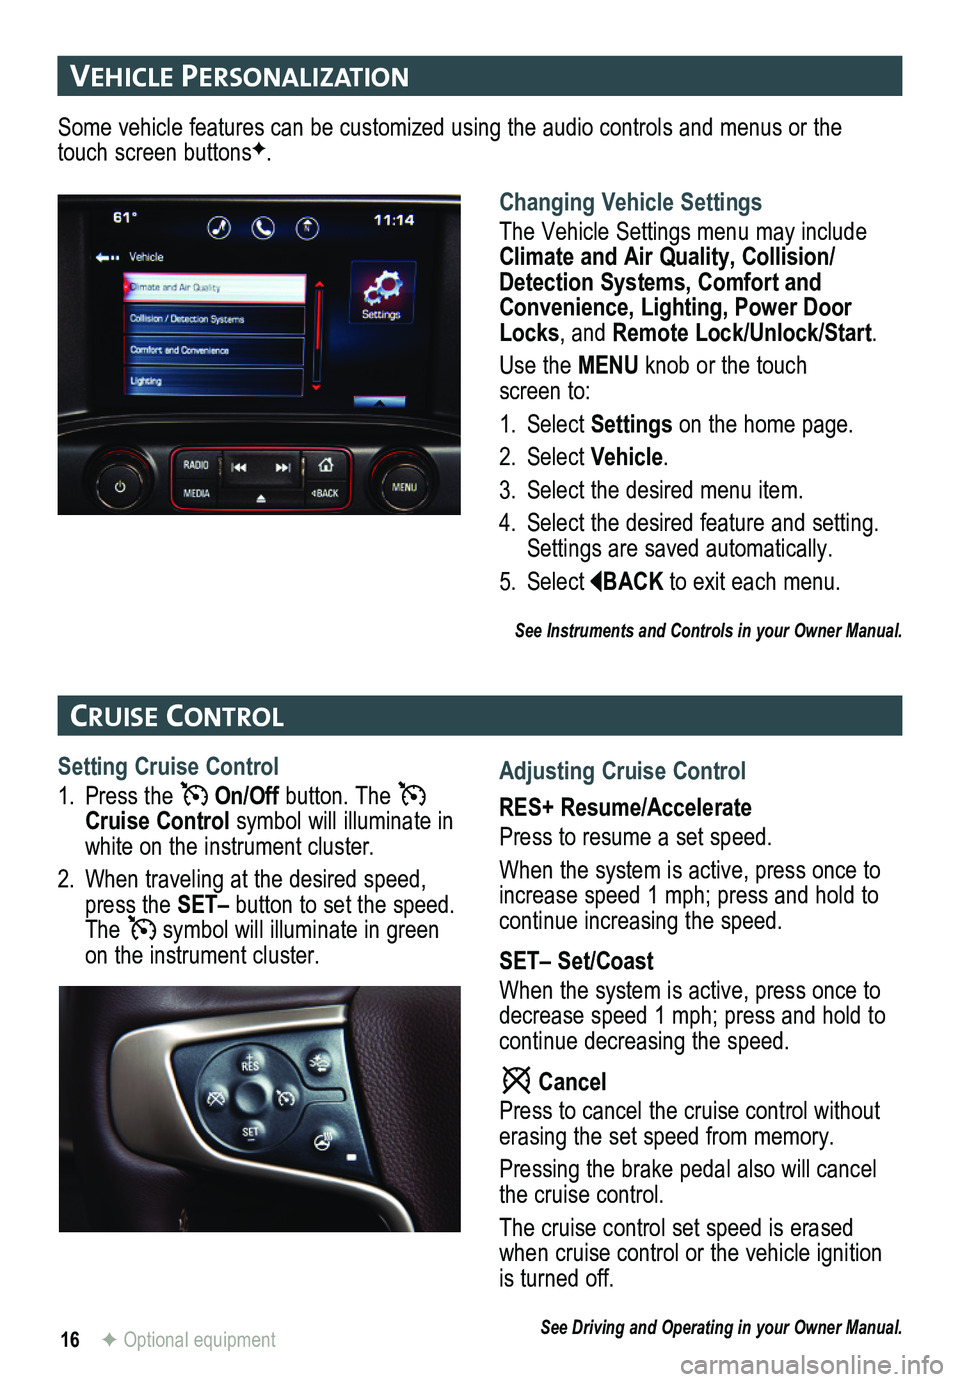 GMC SIERRA HD 2015  Get To Know Guide 16
veHIcle PersonalIzatIon
cruIse control
F Optional equipment
Changing Vehicle Settings
The Vehicle Settings menu may include Climate and Air Quality, Collision/Detection Systems, Comfort and Conveni